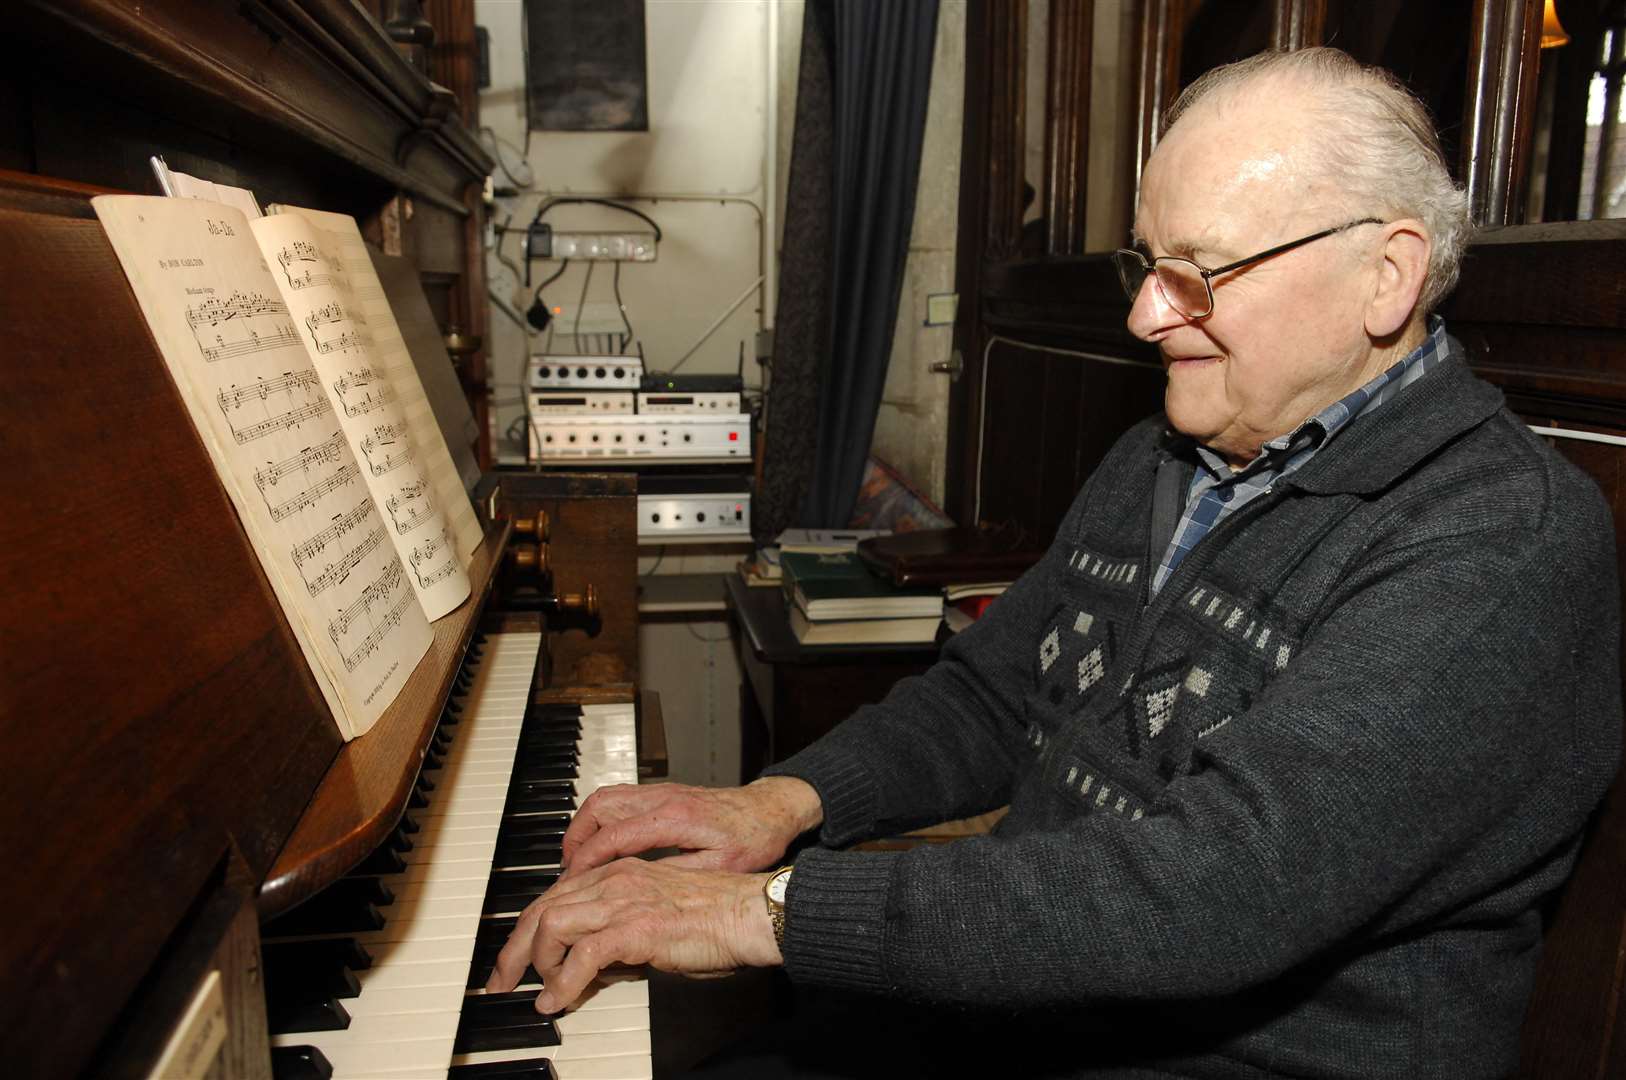 Bob Caudwell was able to bash out show tunes as well as church music